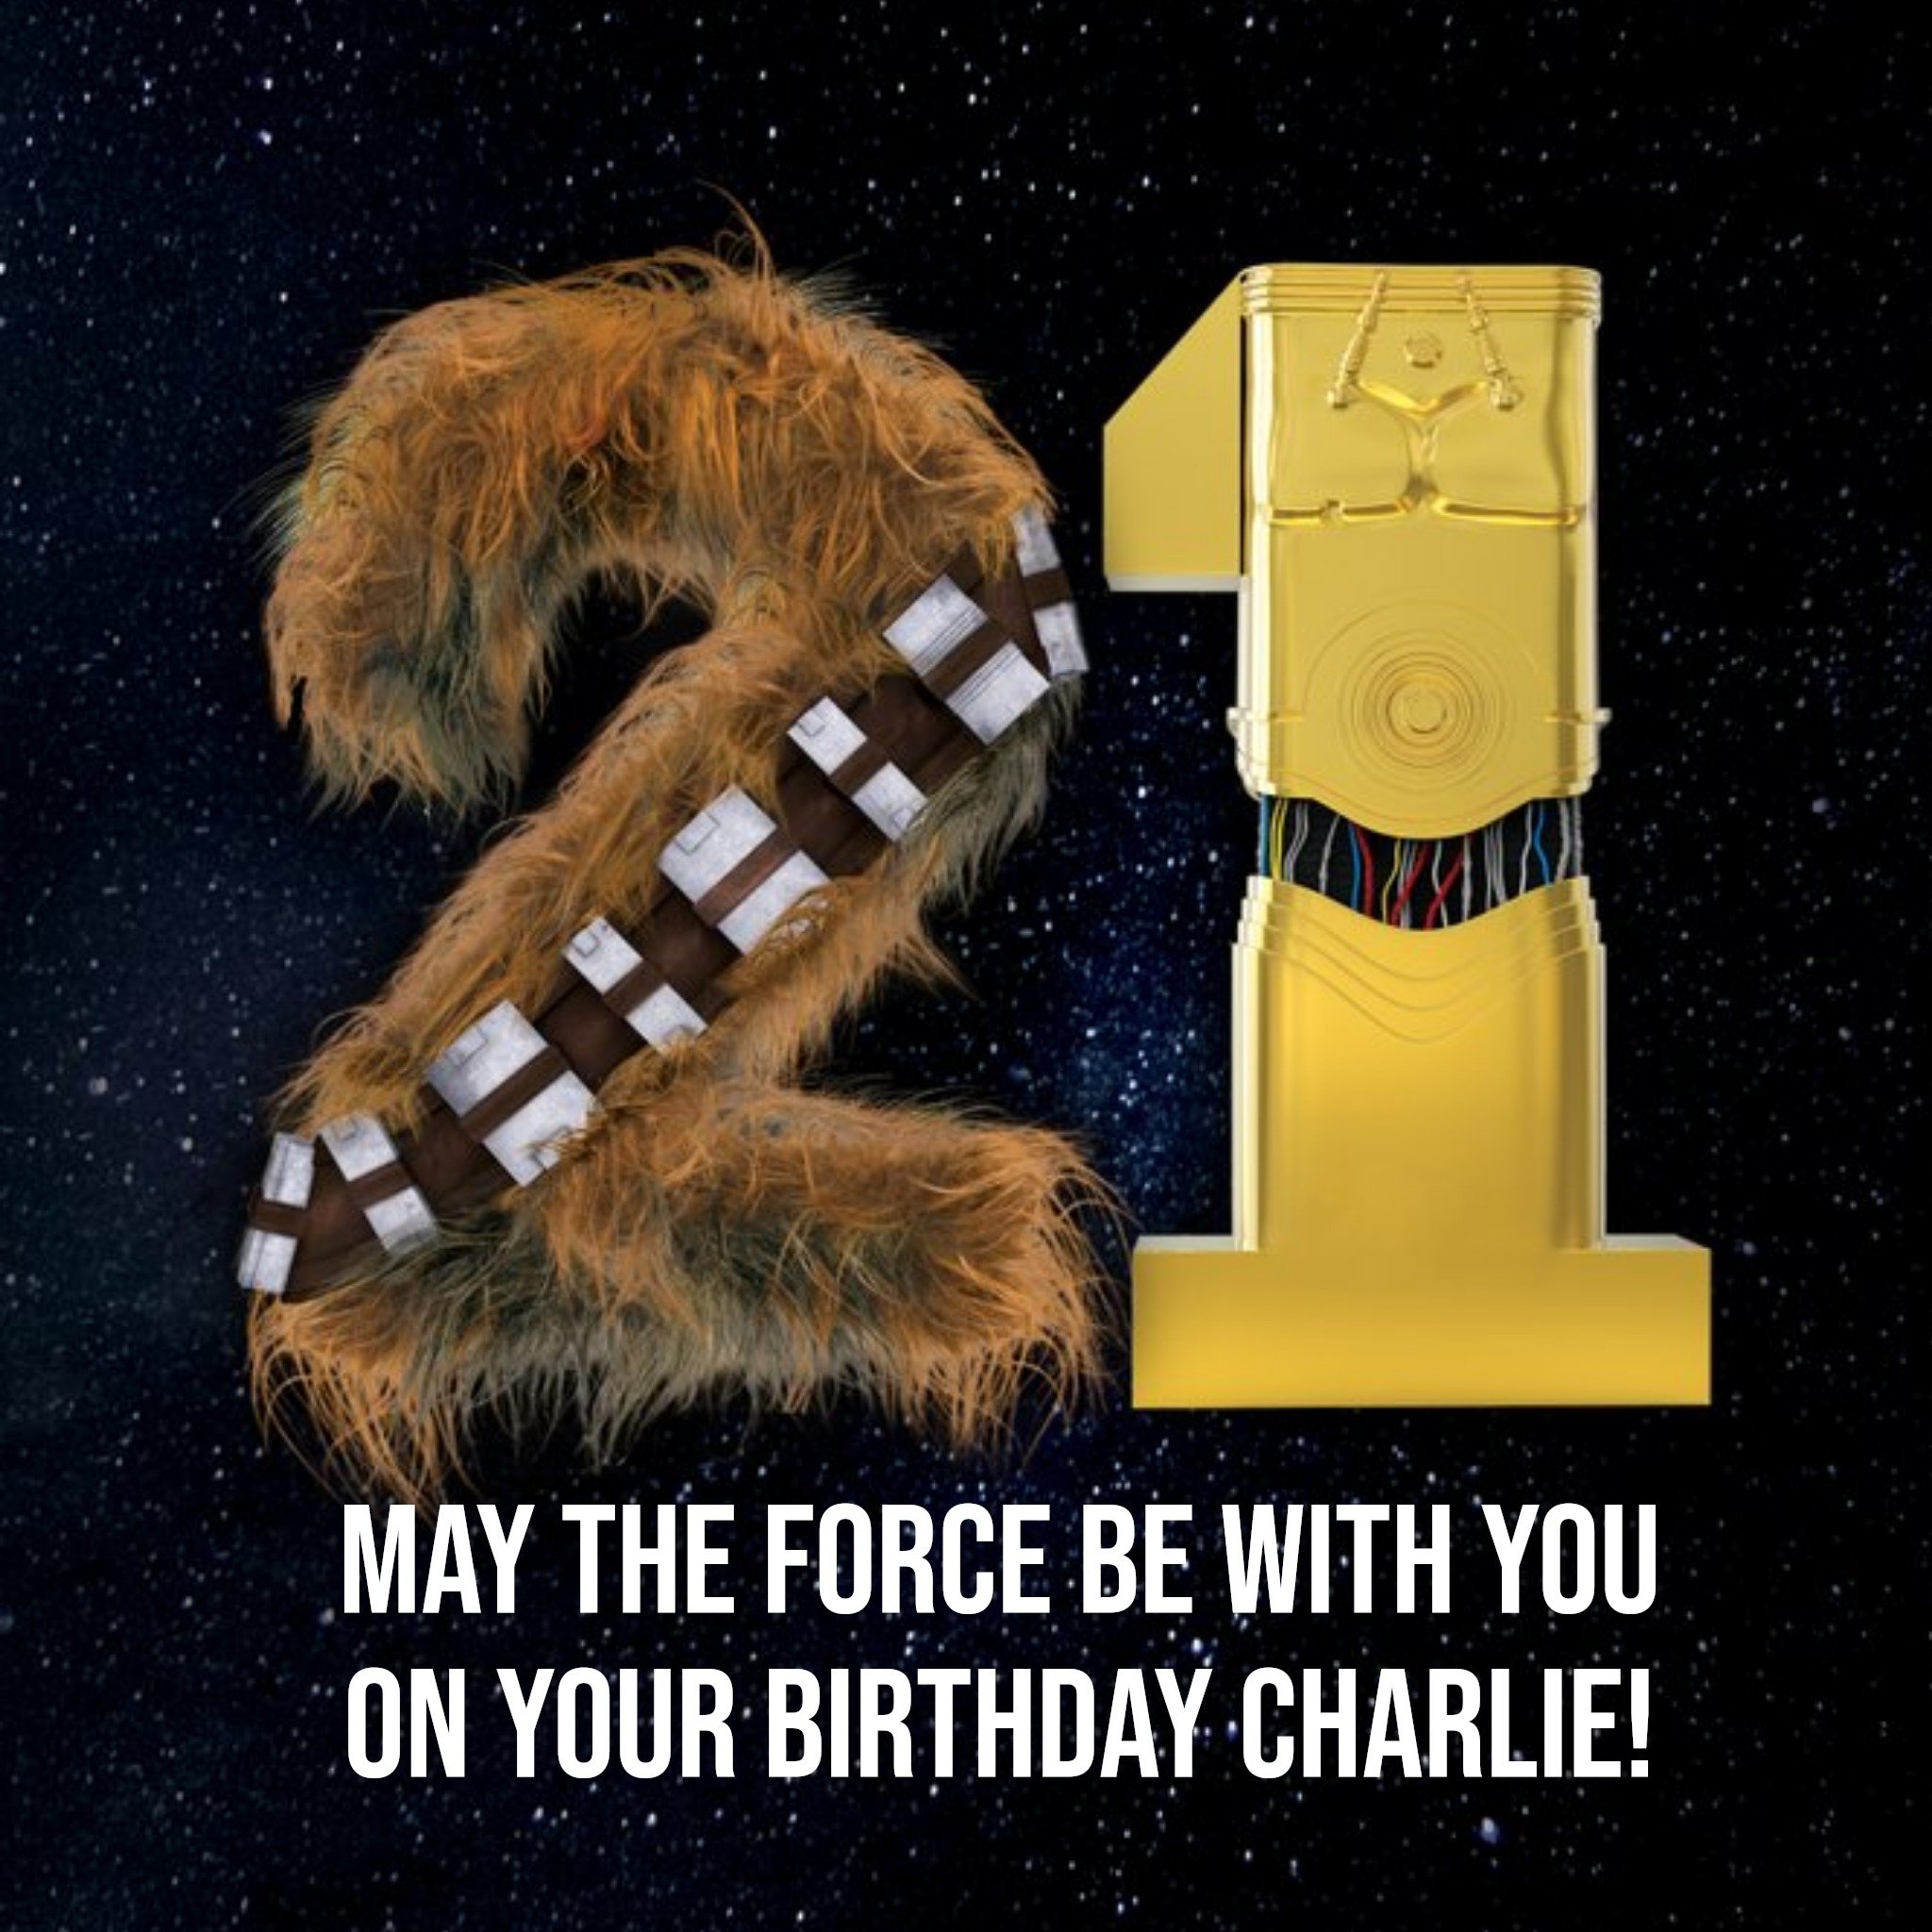 Disney star Wars May The Force Be With You 21st Birthday Card, Square